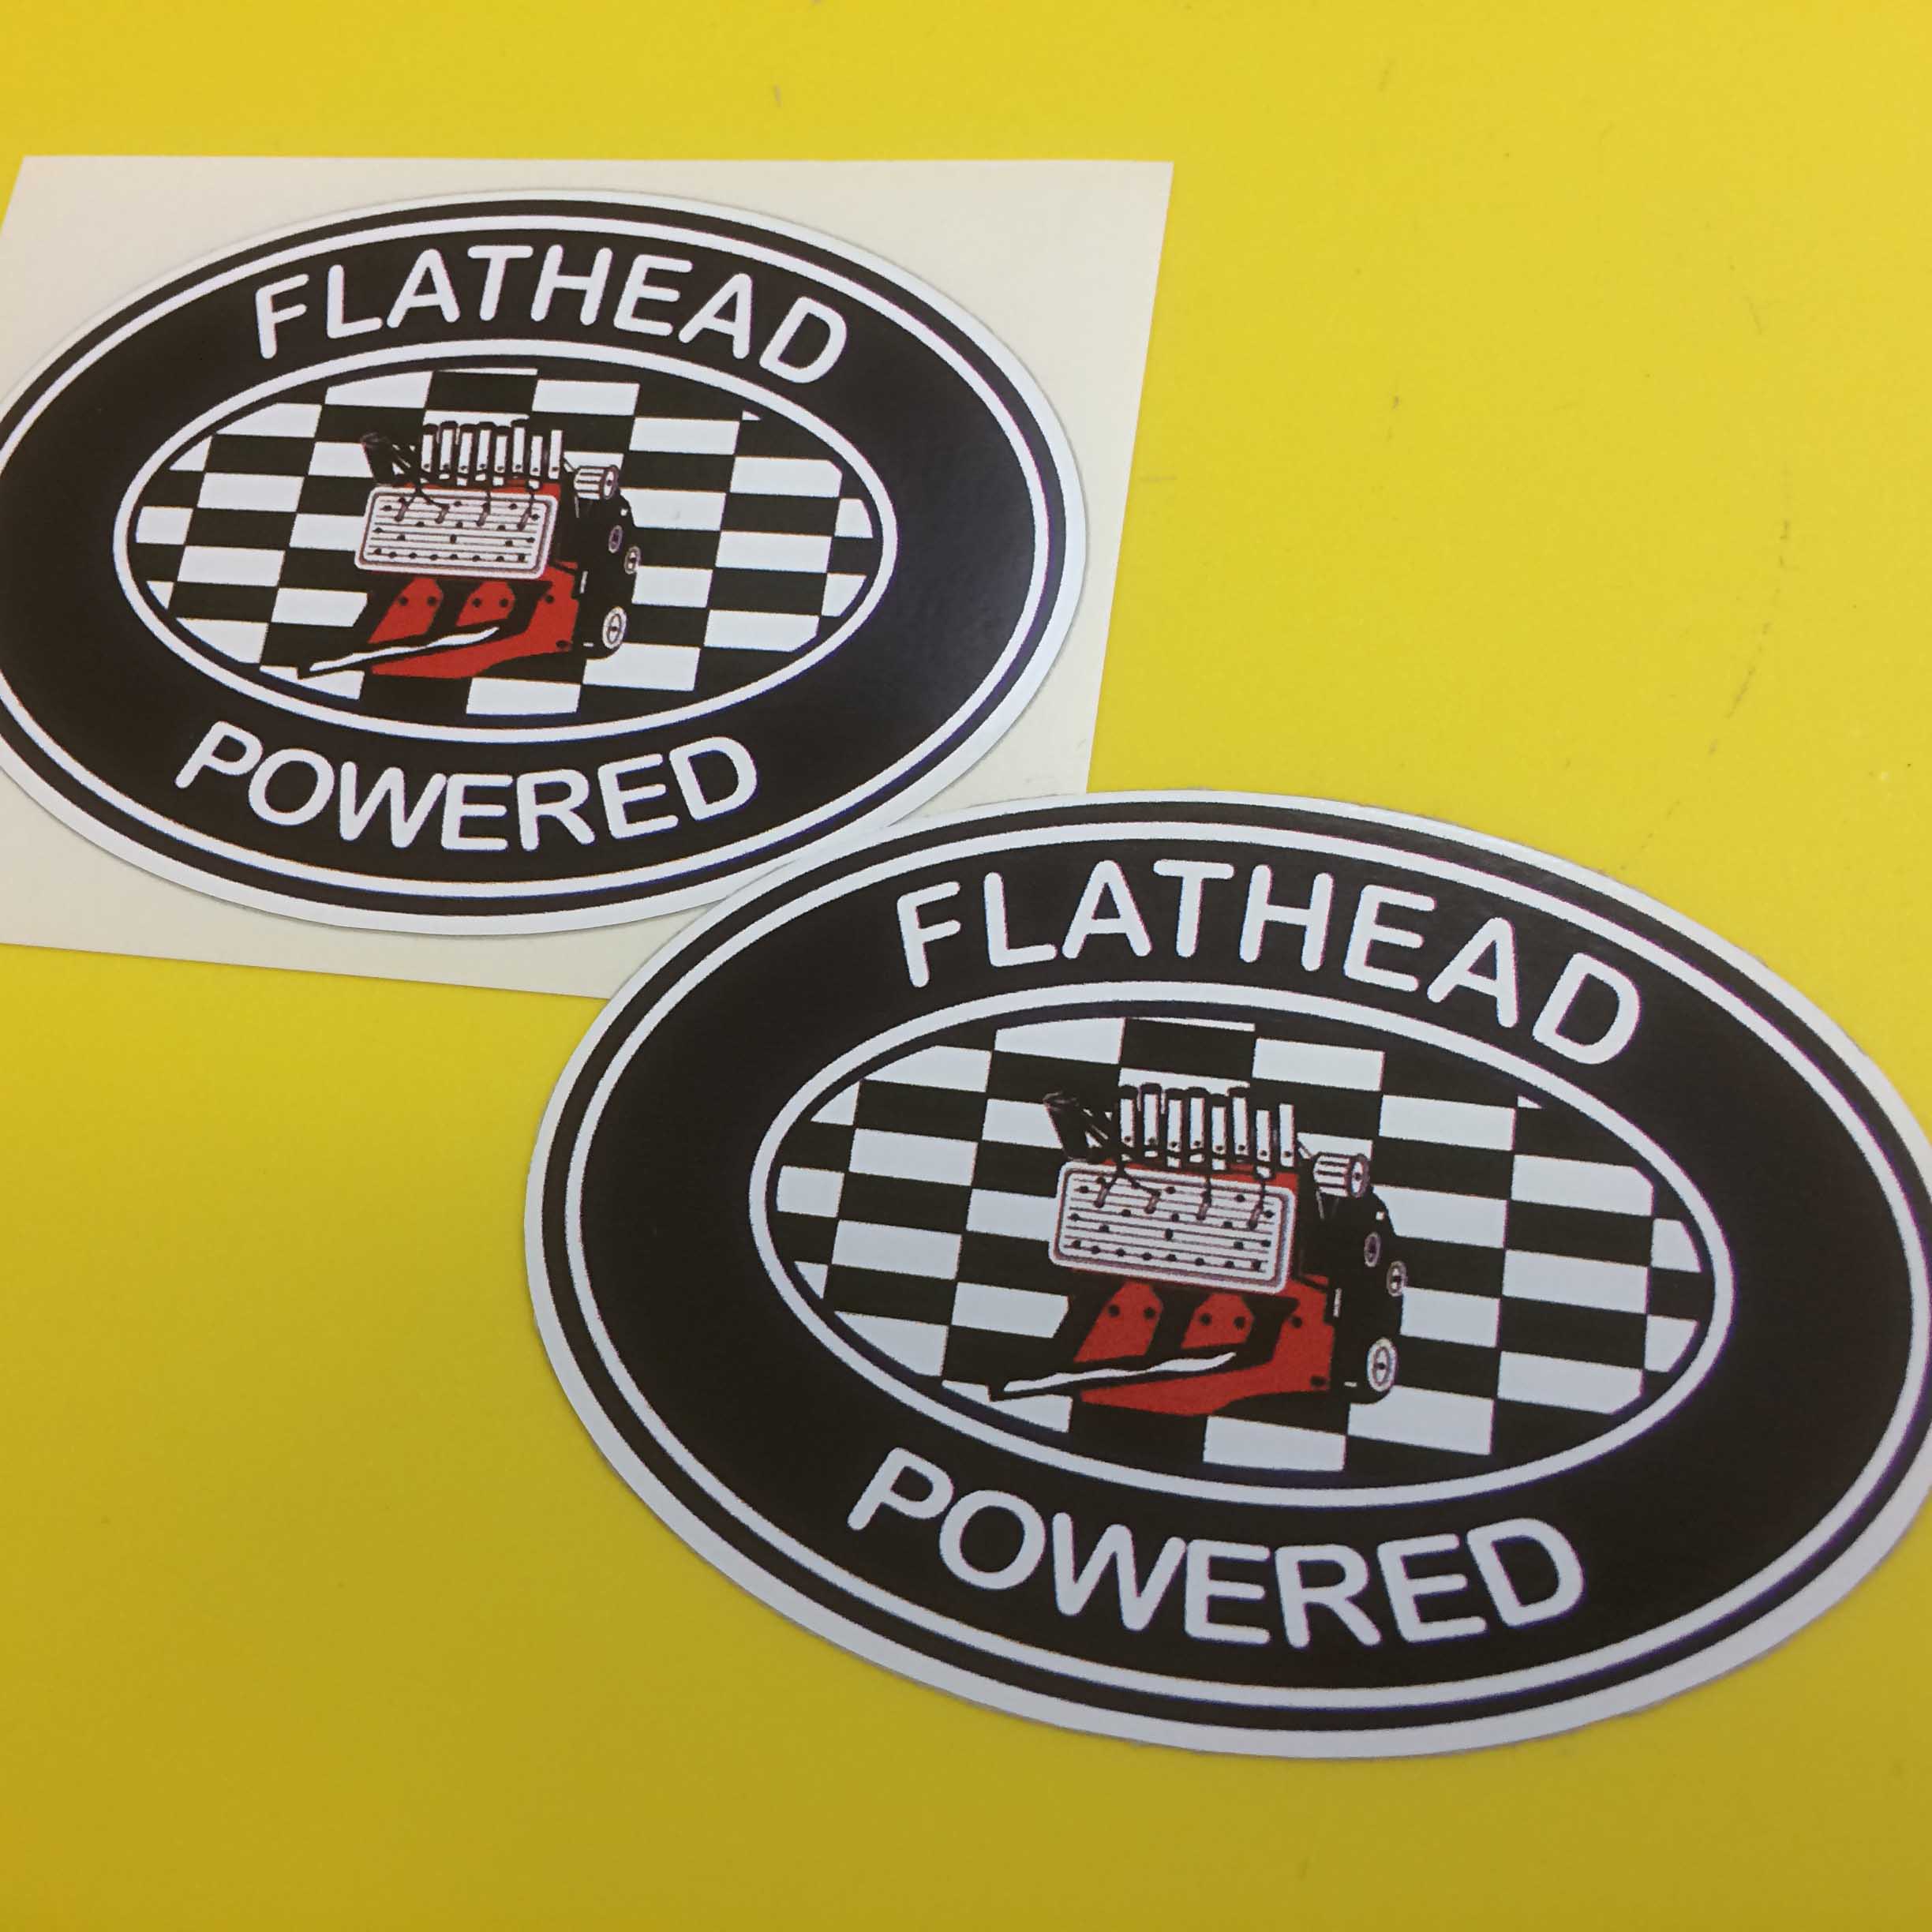 FLATHEAD POWERED RACE RALLY STICKERS. Flathead Powered in white lettering surrounds a black oval sticker. In the centre is a red flathead engine on a black and white chequer oval.